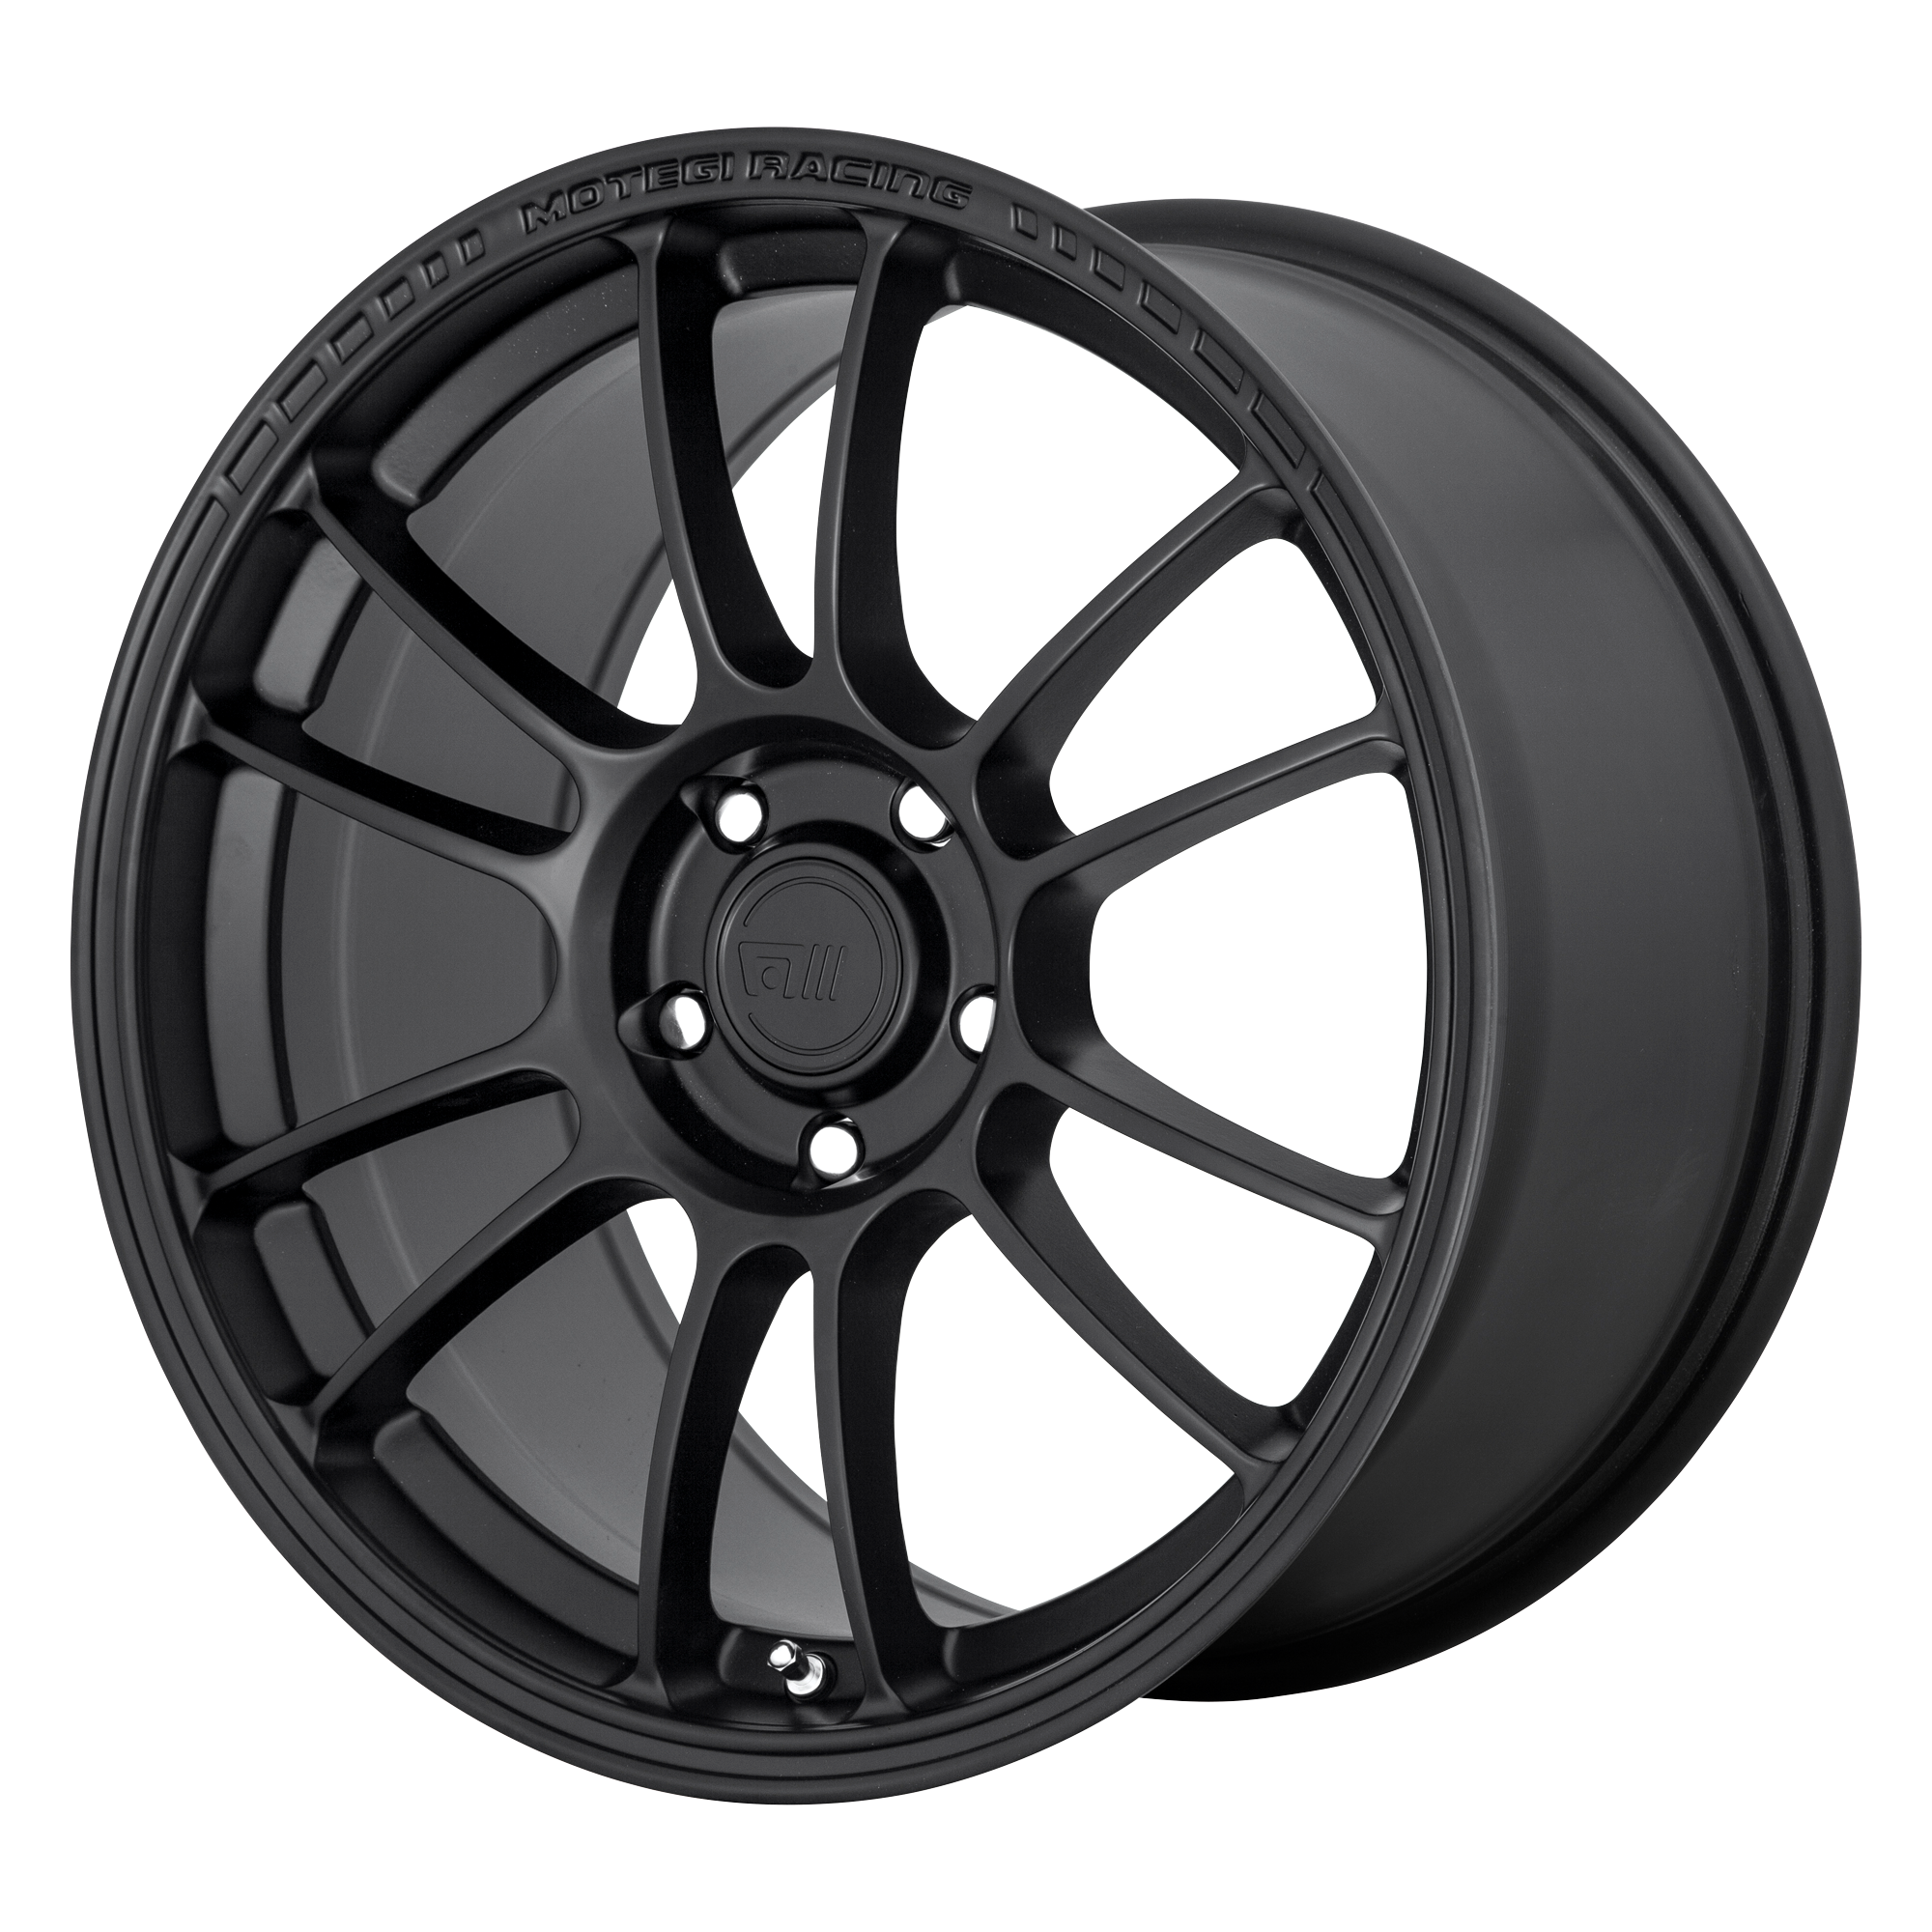 SS6 18x8.5 5x114.30 SATIN BLACK (35 mm) - Tires and Engine Performance